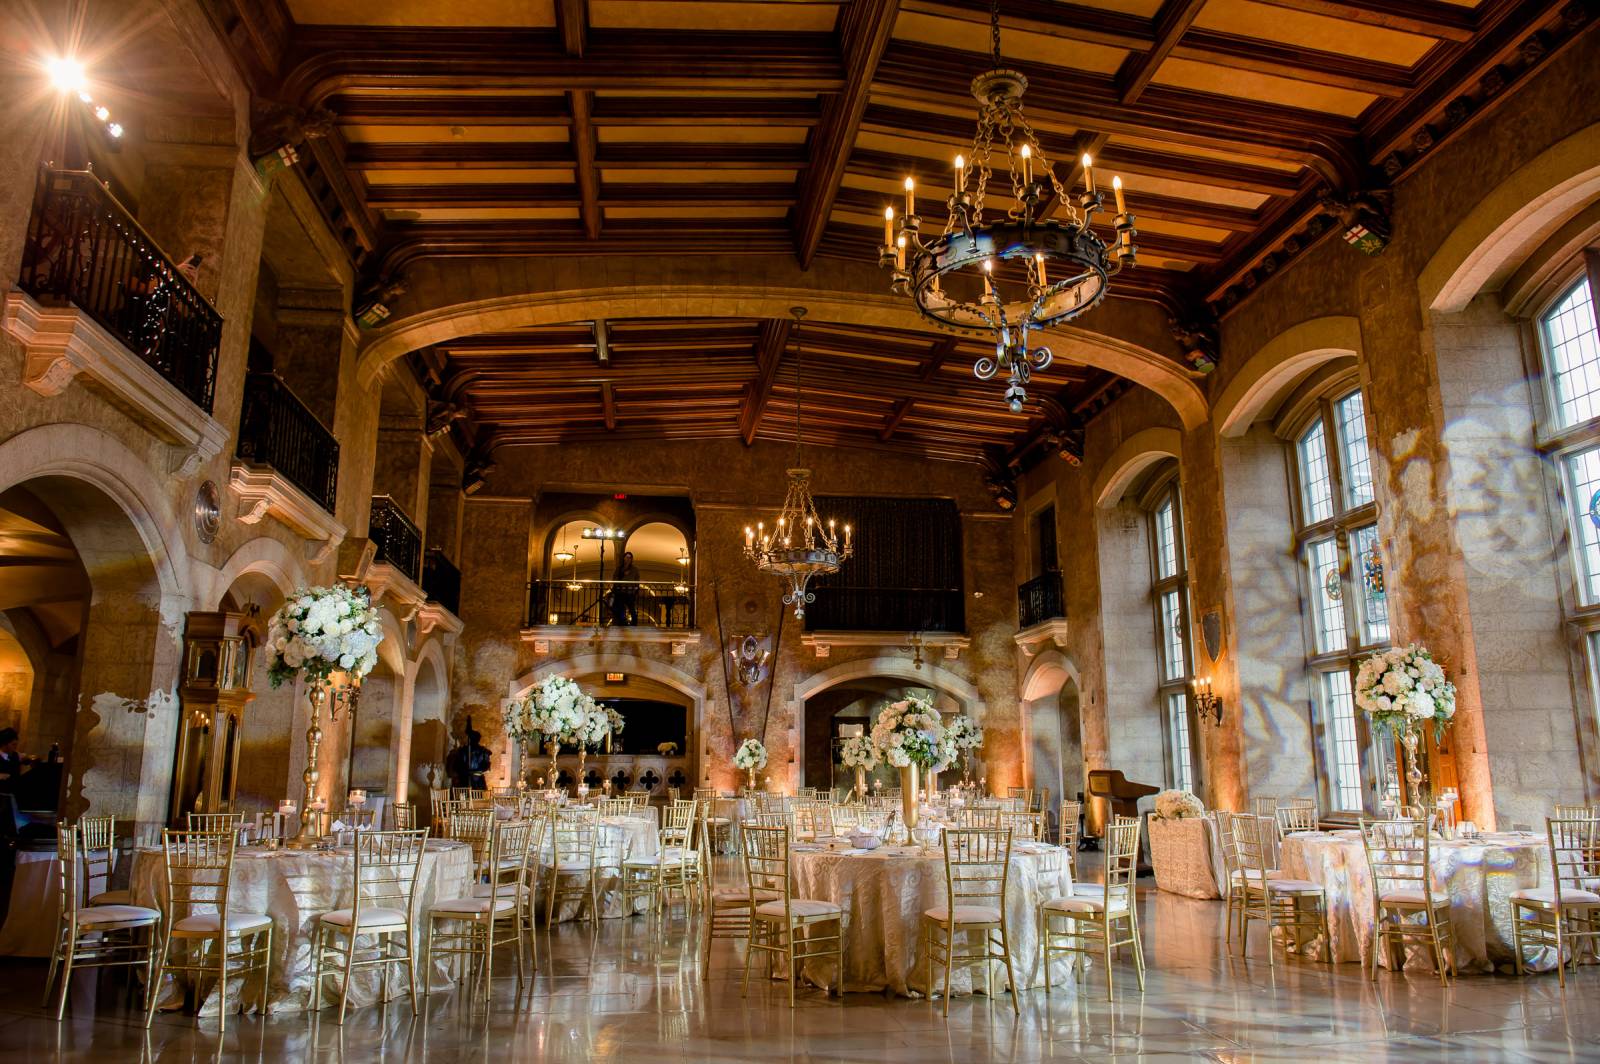 Fairmont Banff Springs Wedding Venue Weddings At The Castle In The Rockies Banff